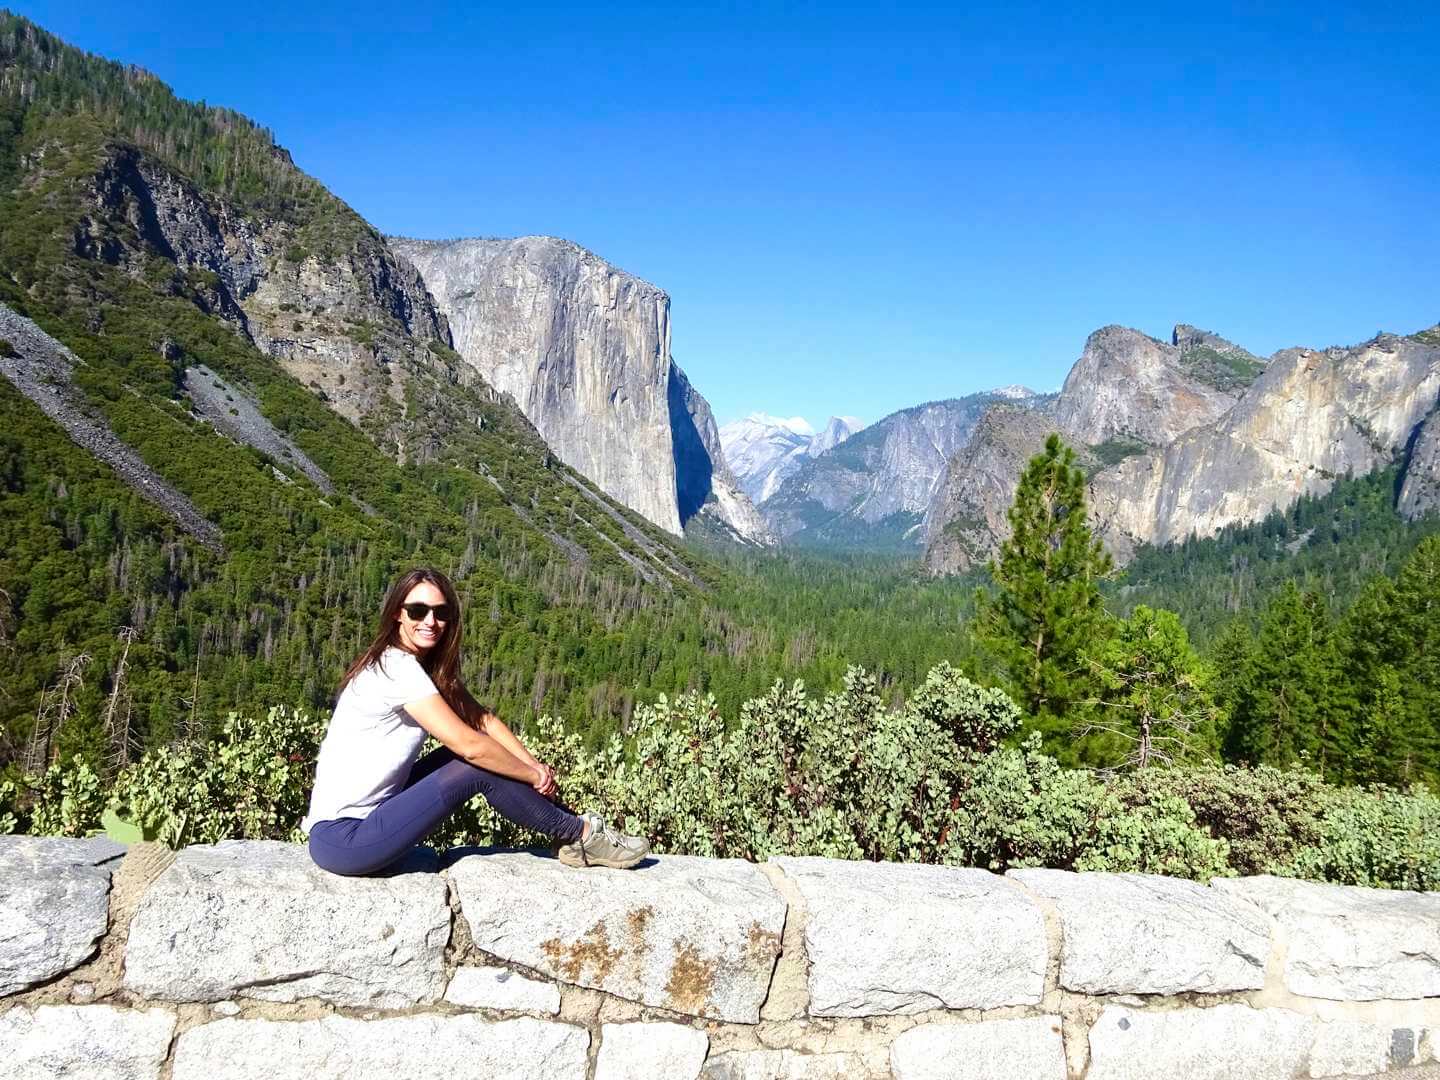 30 Useful Yosemite Tips for Visiting the Park